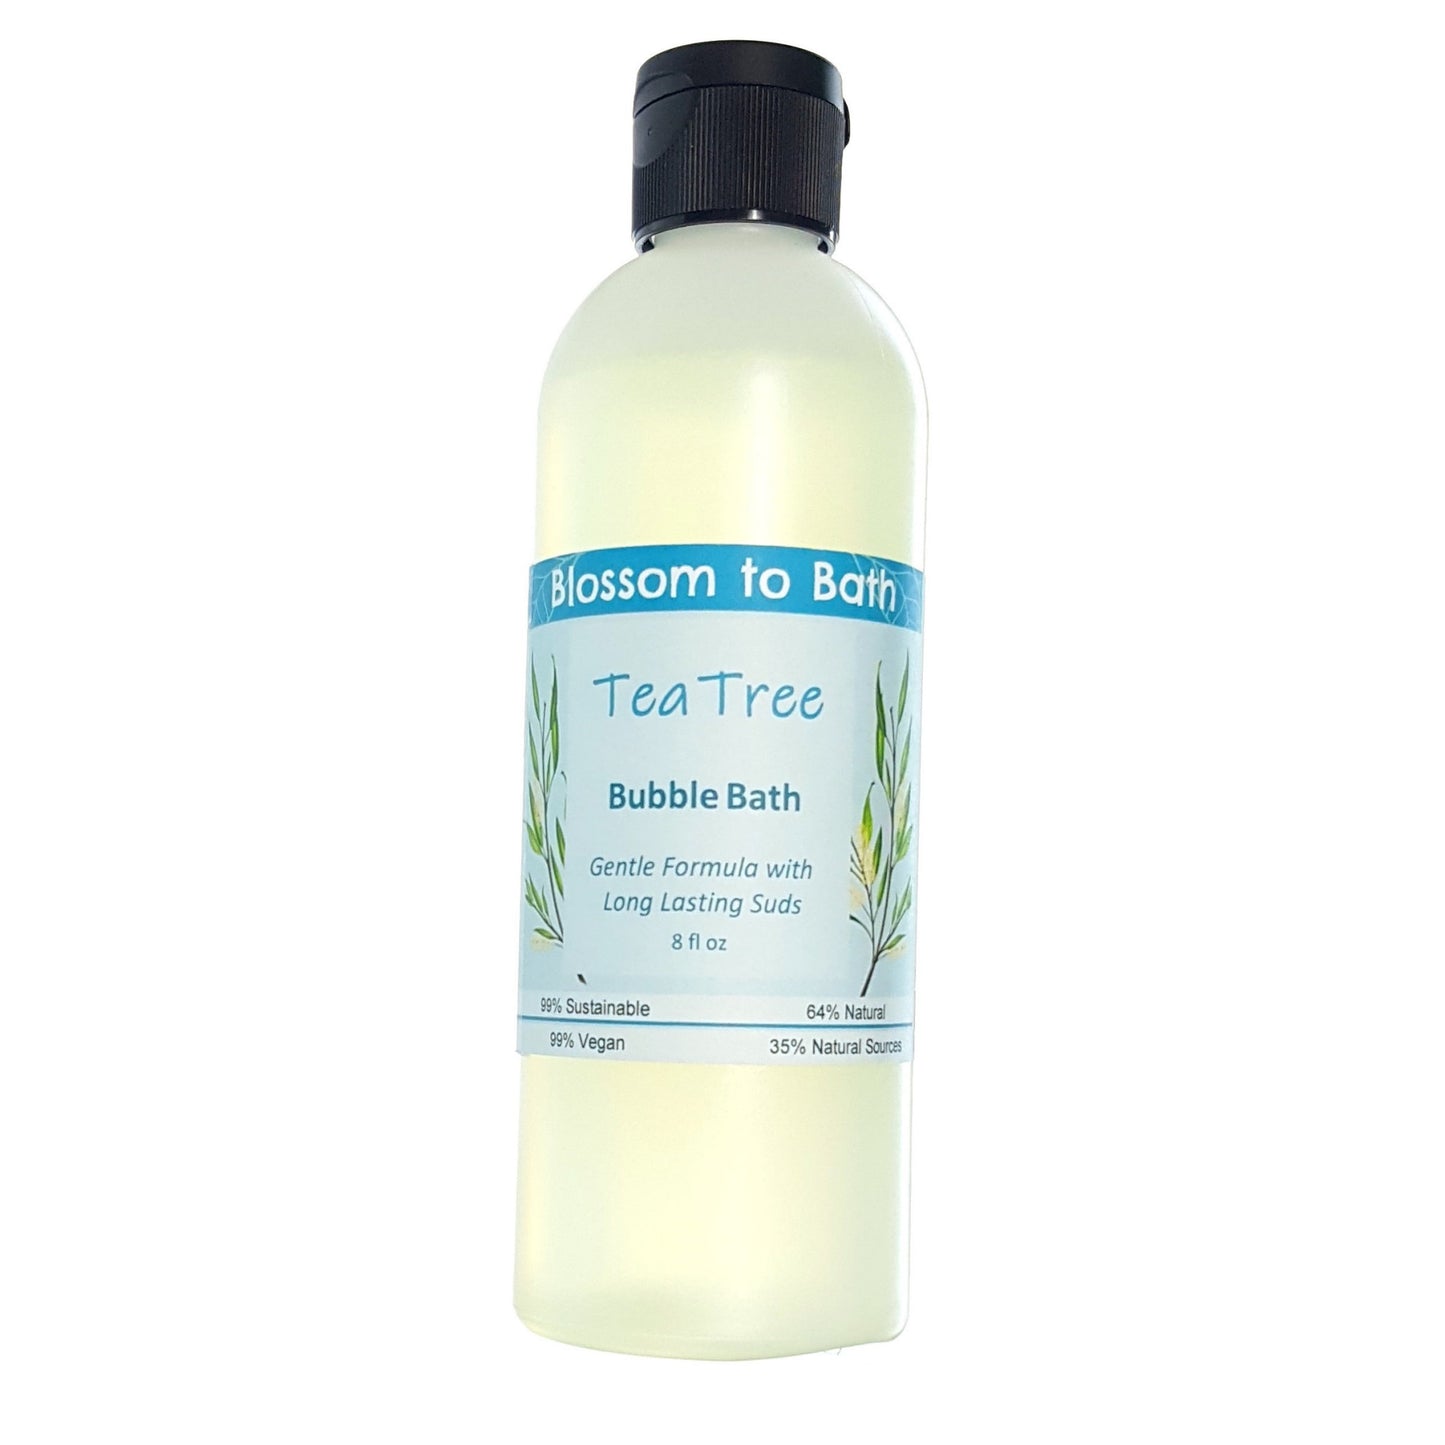 Buy Blossom to Bath Tea Tree Bubble Bath from Flowersong Soap Studio.  Lively, long lasting luxury bubbles in a gentle plant based formula for maximum relaxation time  Tea tree's fresh fragrance embodies a deep down clean.